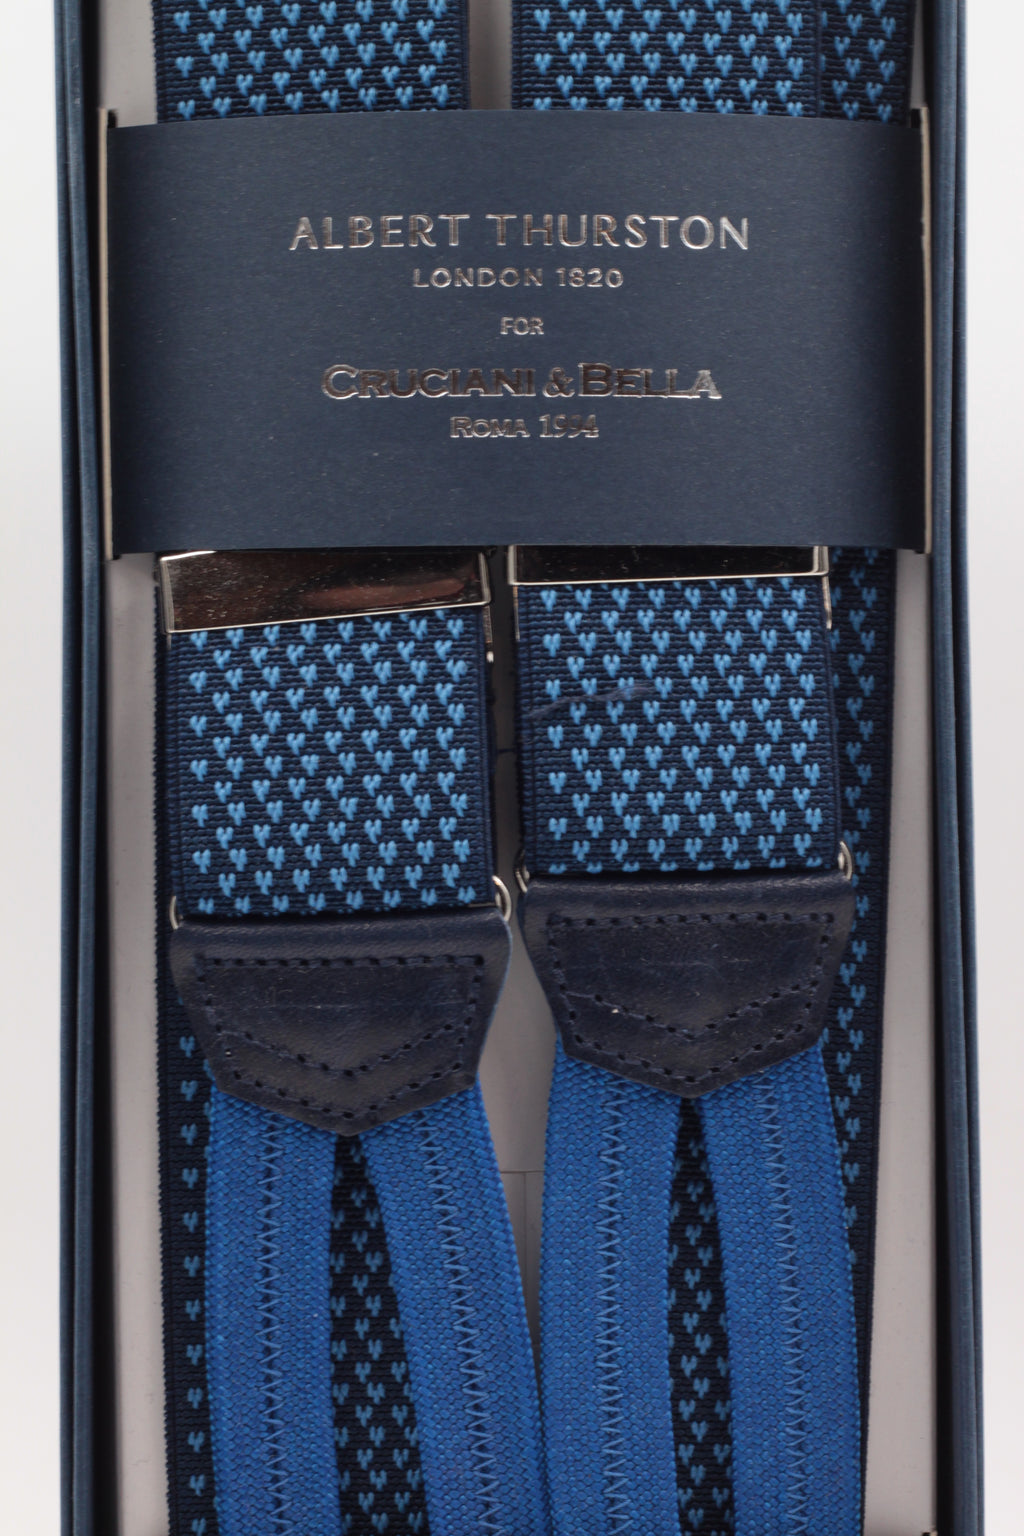 Albert Thurston for Cruciani & Bella Made in England Adjustable Sizing 35 mm elastic navy blue, olympic blue motif braces Braid ends Y-Shaped Nickel Fittings Size: L